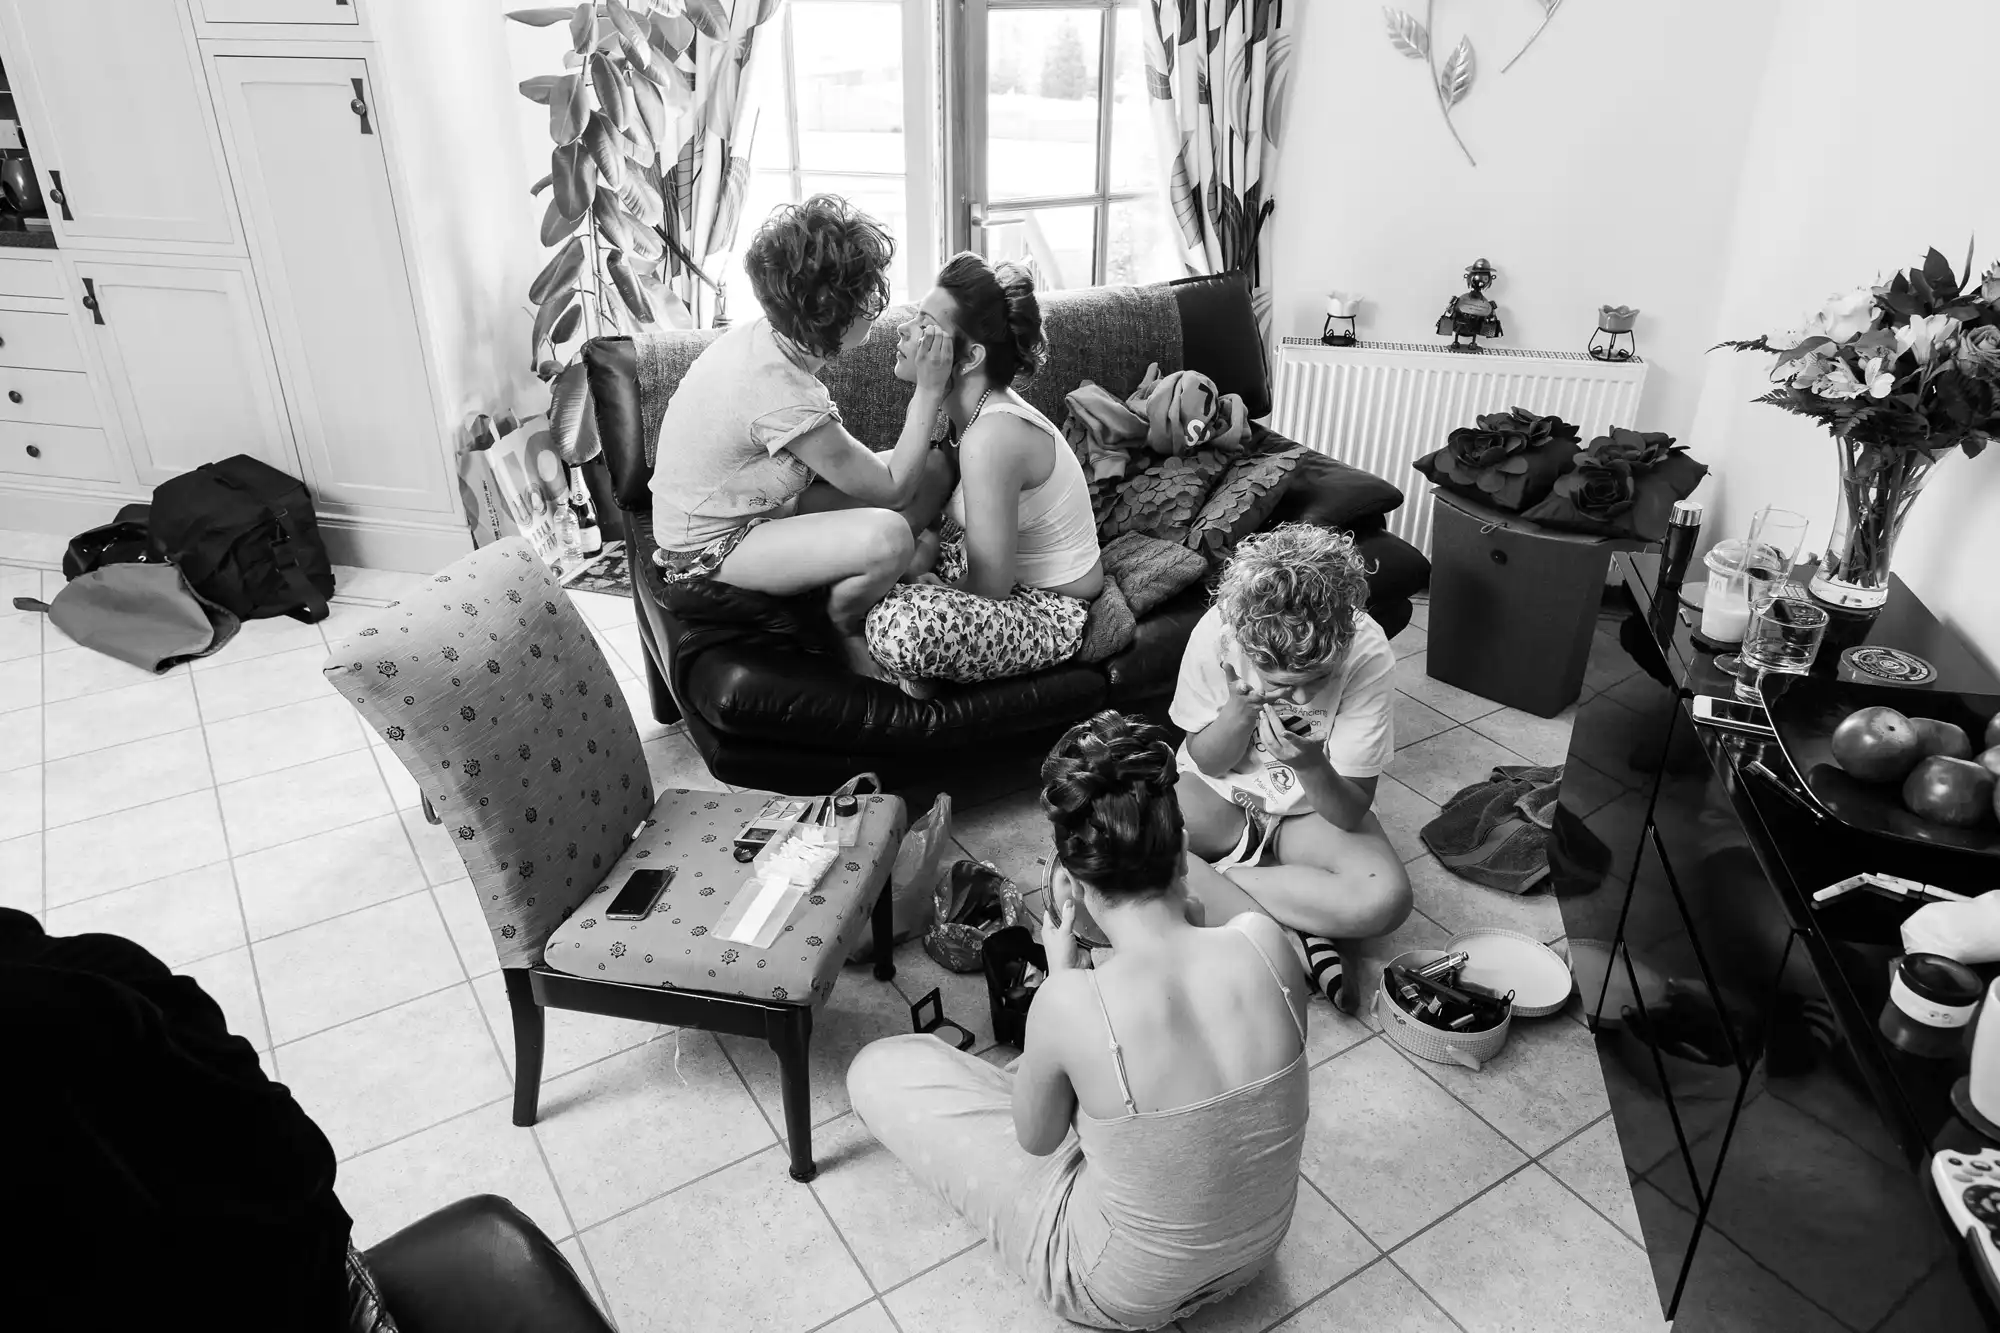 Black and white photo of four women in a living room, one getting her makeup done, others seated and chatting, with various items scattered around.